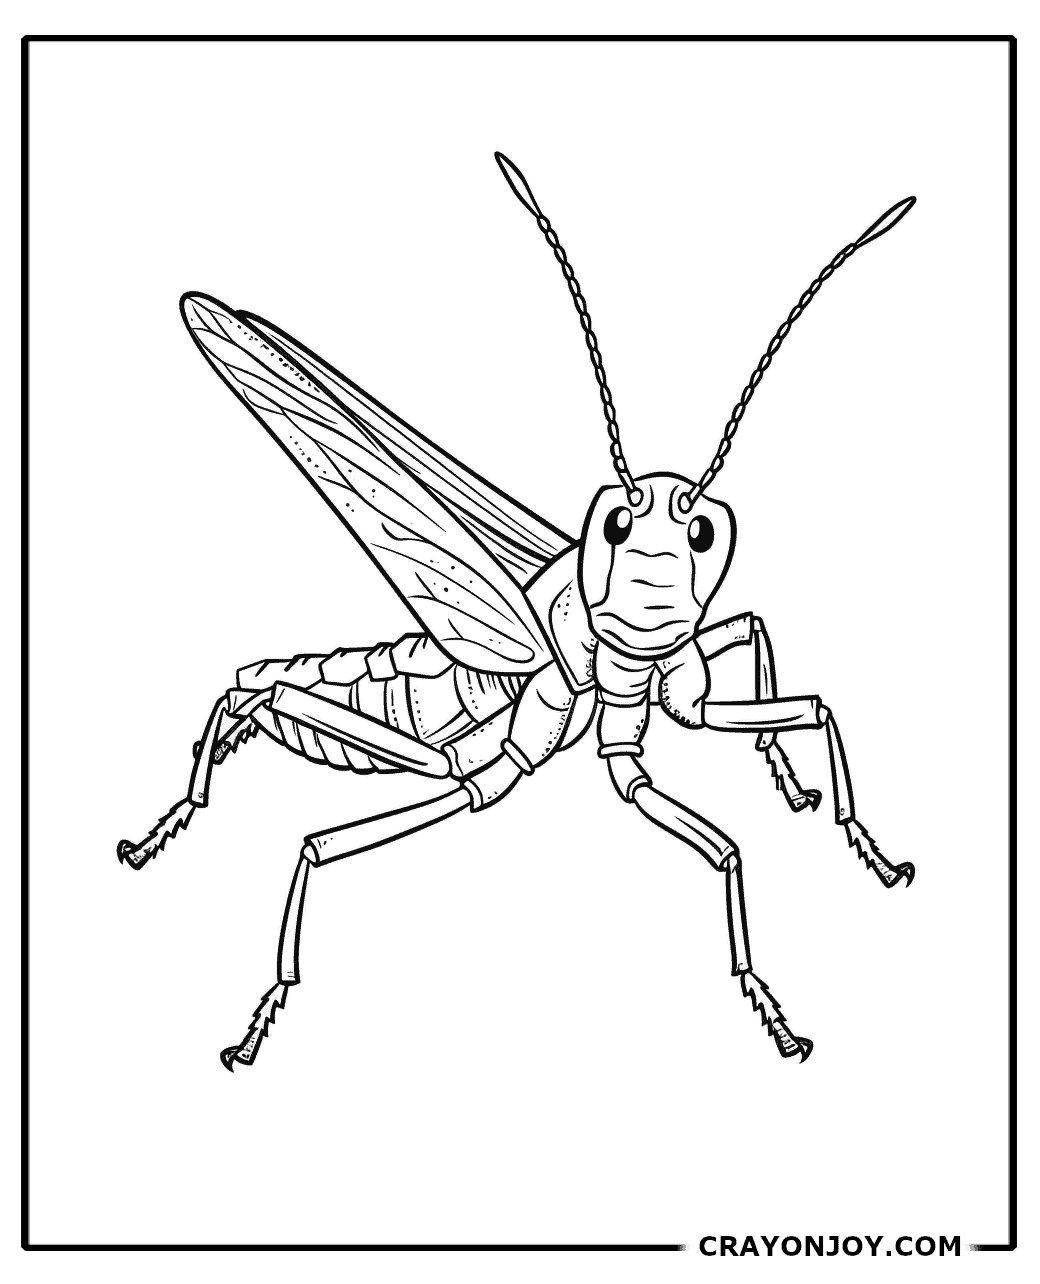 Free Printable Grasshopper Coloring Pages for Kids & Adults